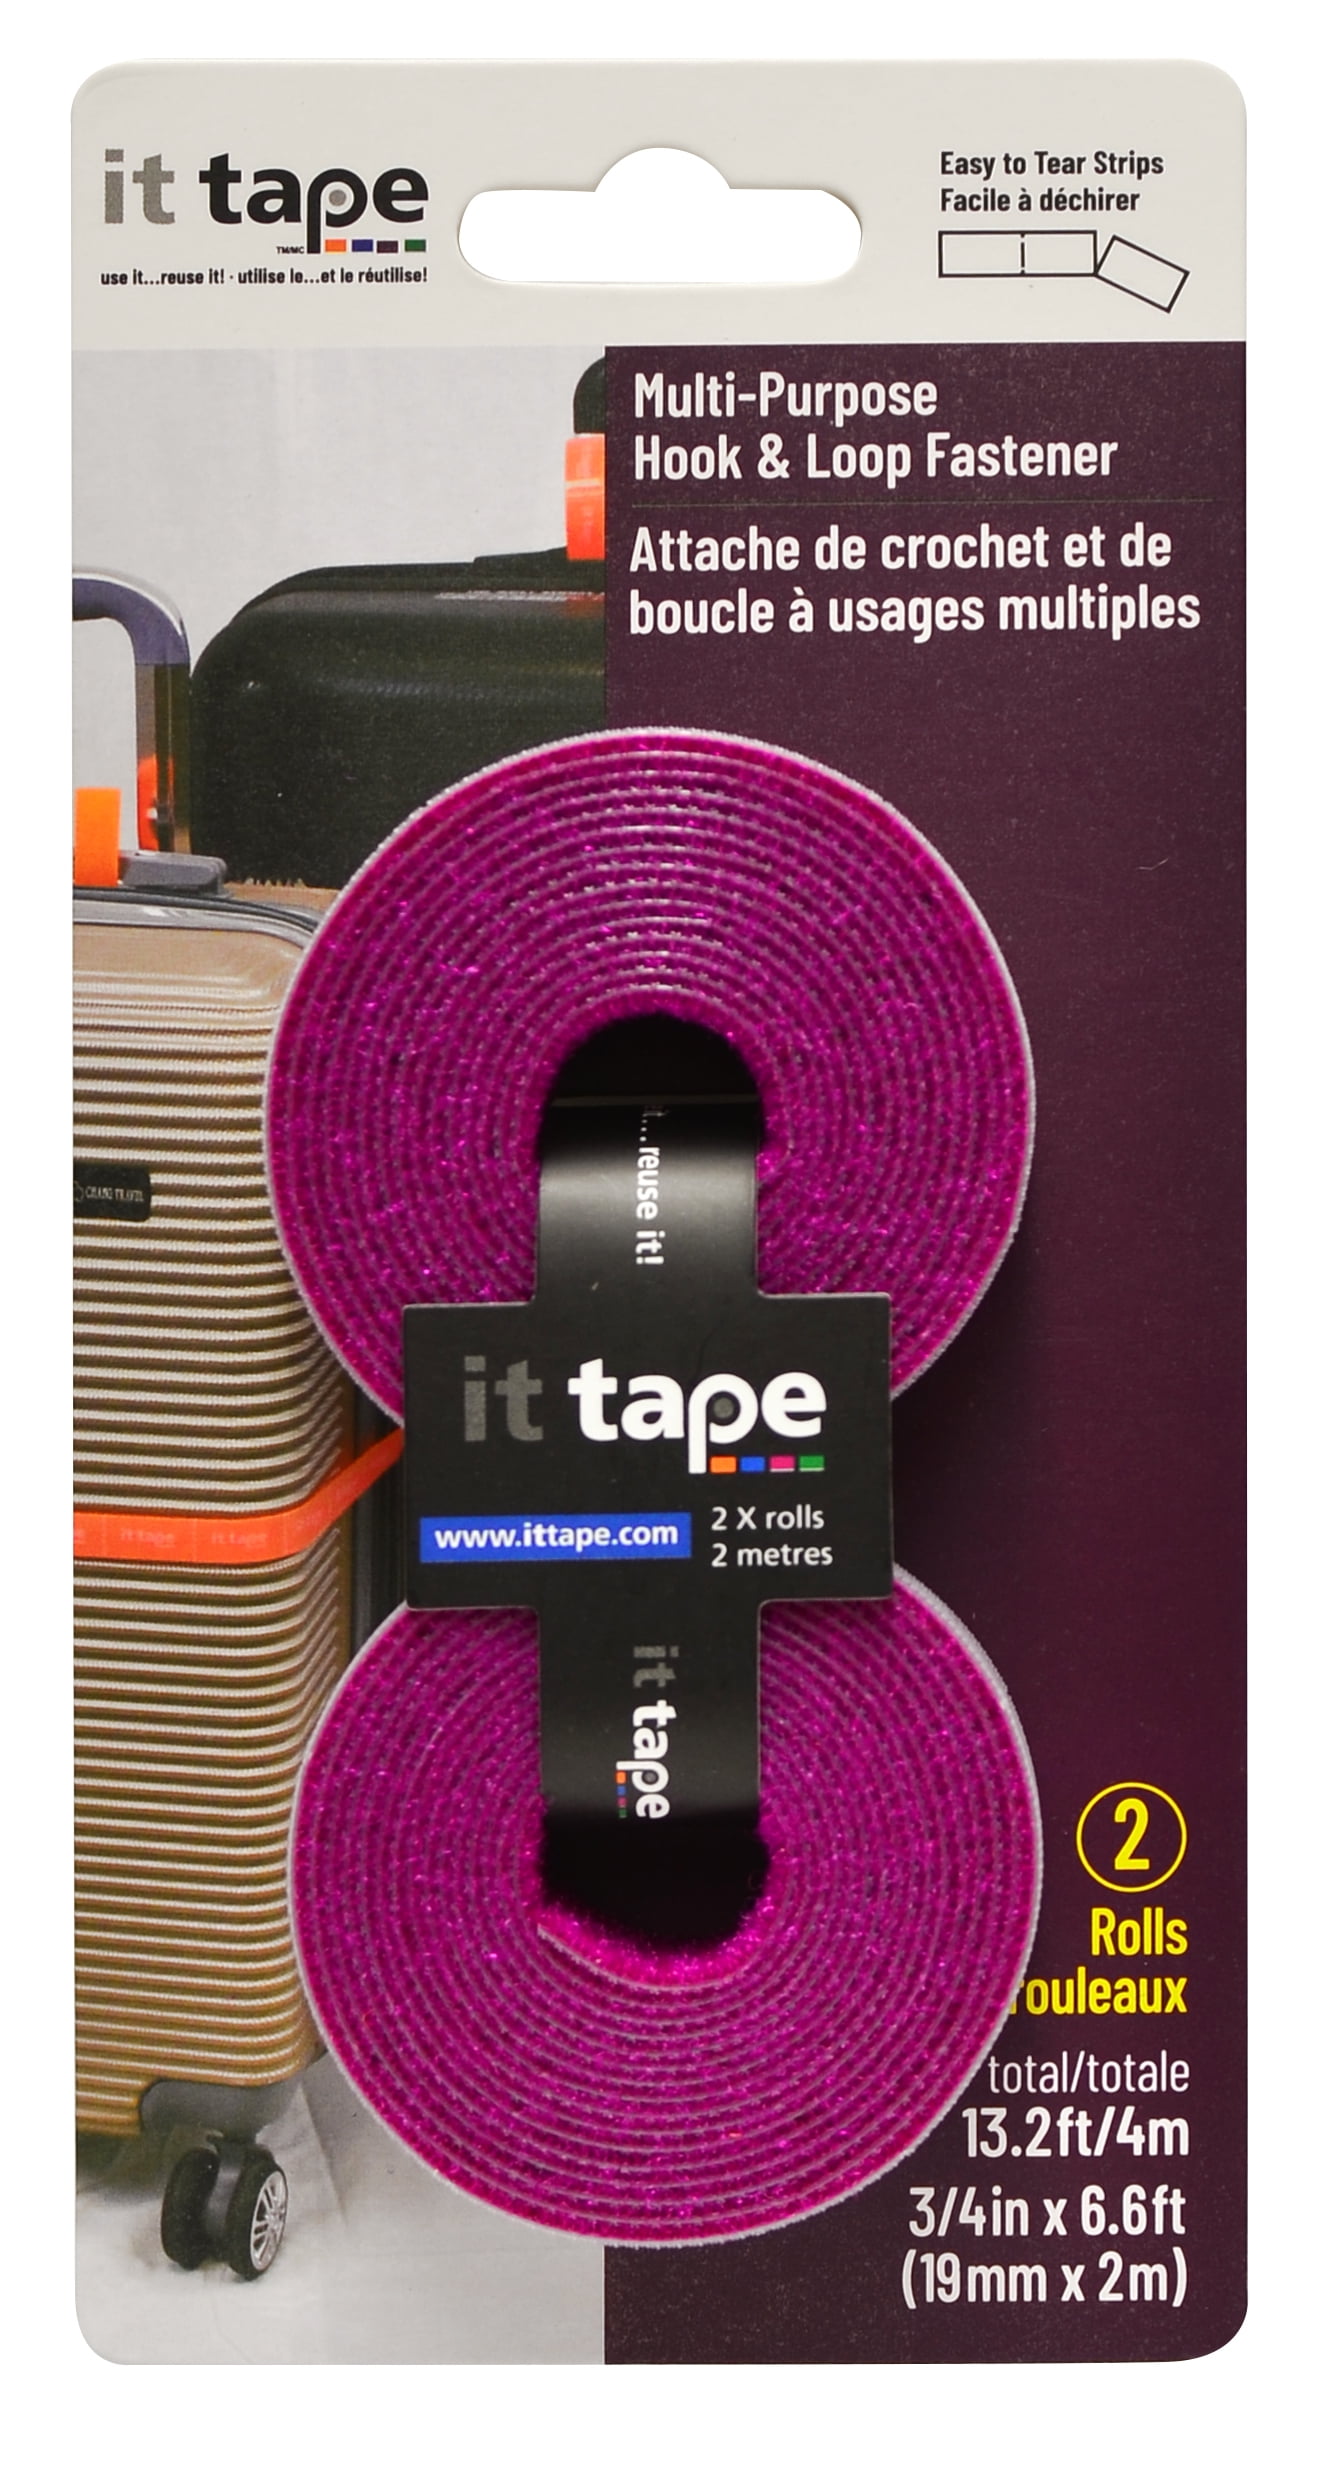 2 x 4 inch - 15 Sets - Adhesive Square Hook and Loop Tape - Heavy Duty Strips - Sticky Back Fastener